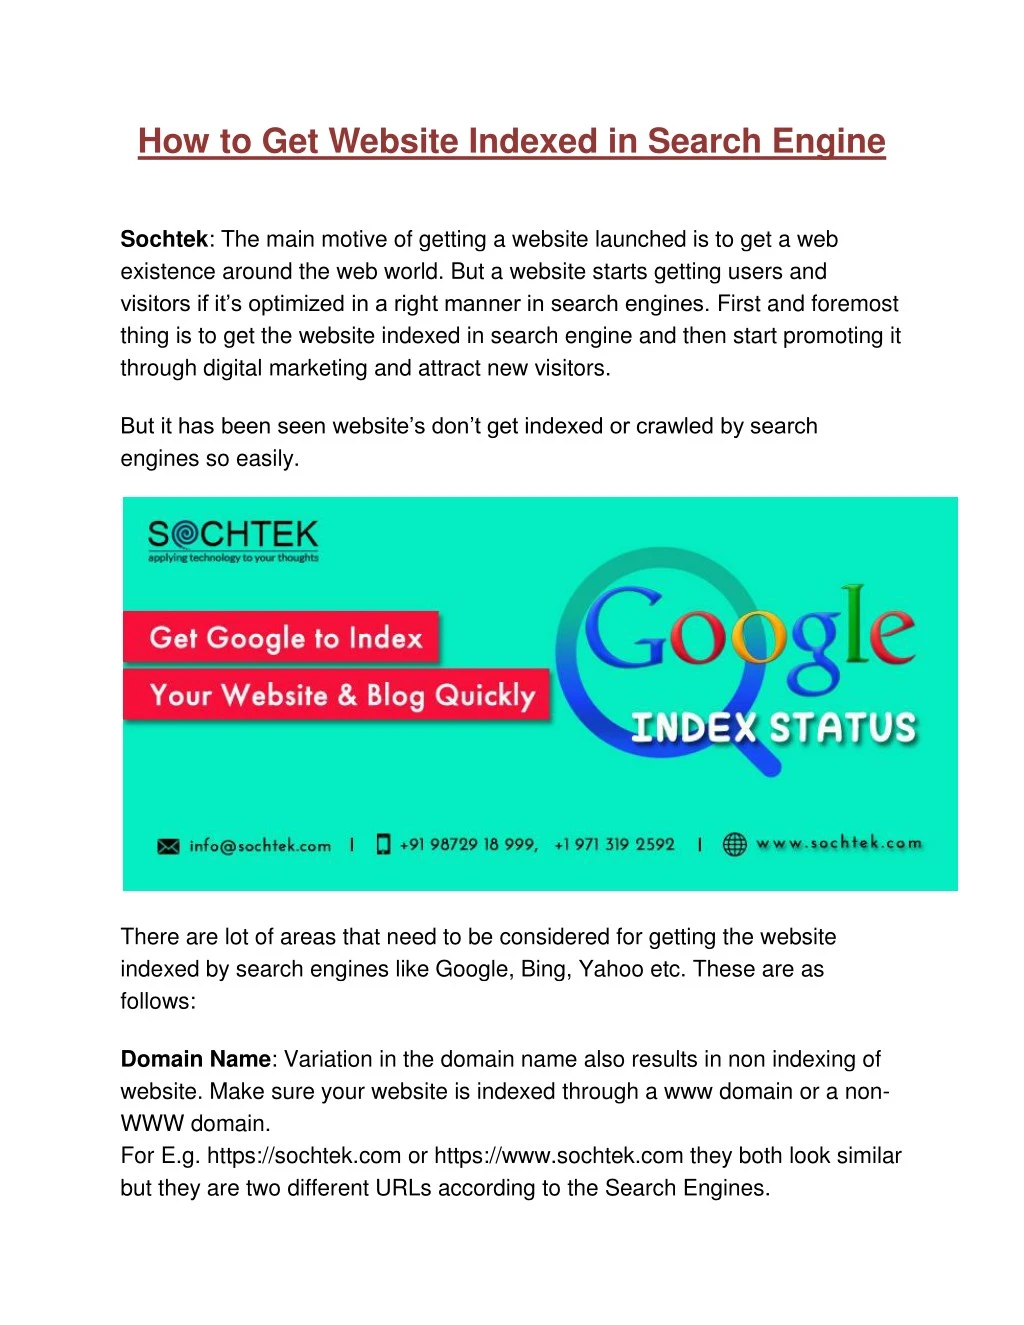 how to get website indexed in search engine